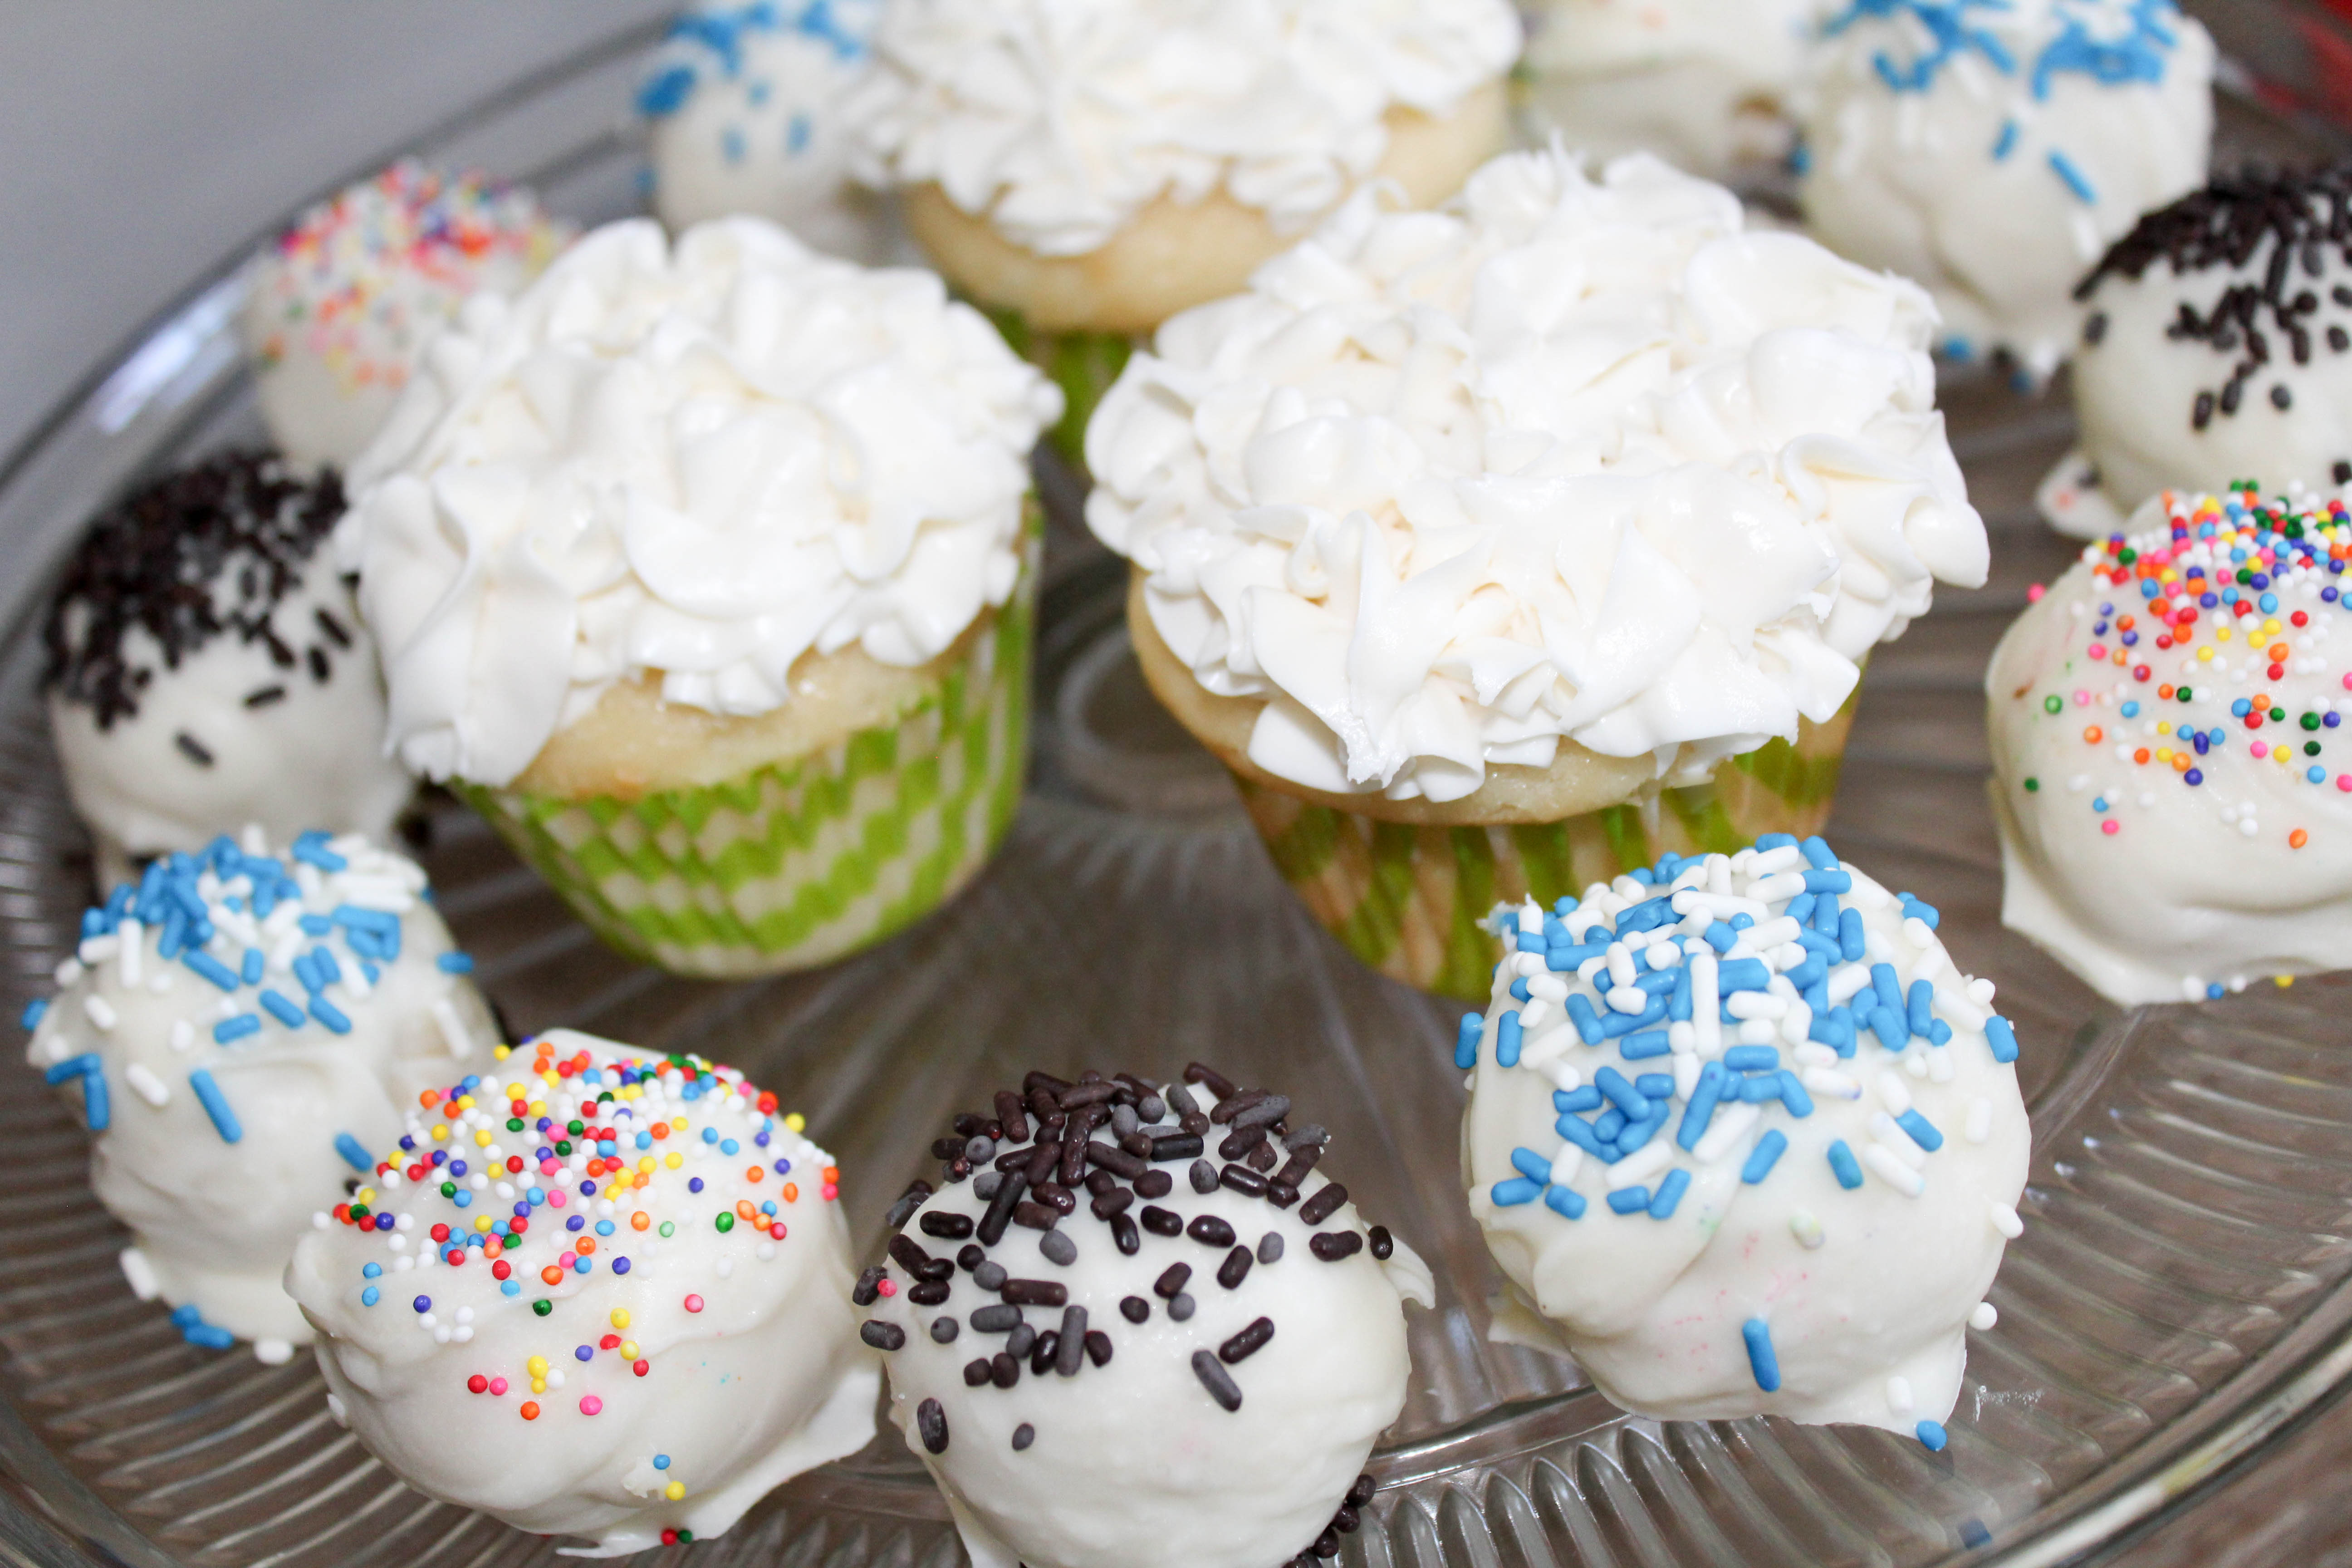 fathers day cupcakes barbecue menu ideas with kids